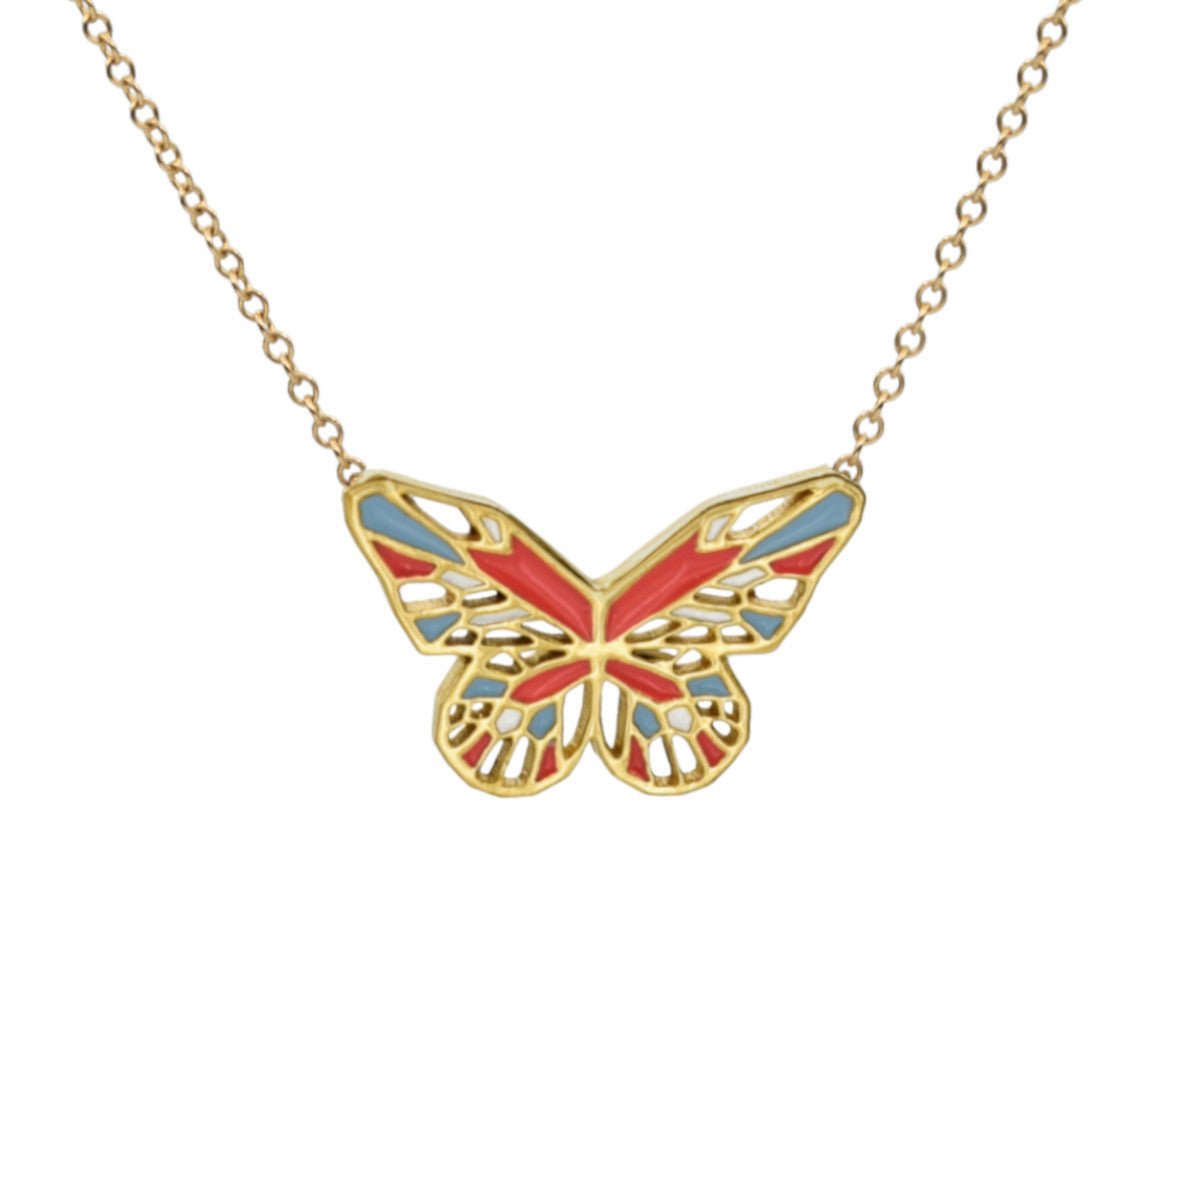 Butterfly necklace gold coral pastel blue